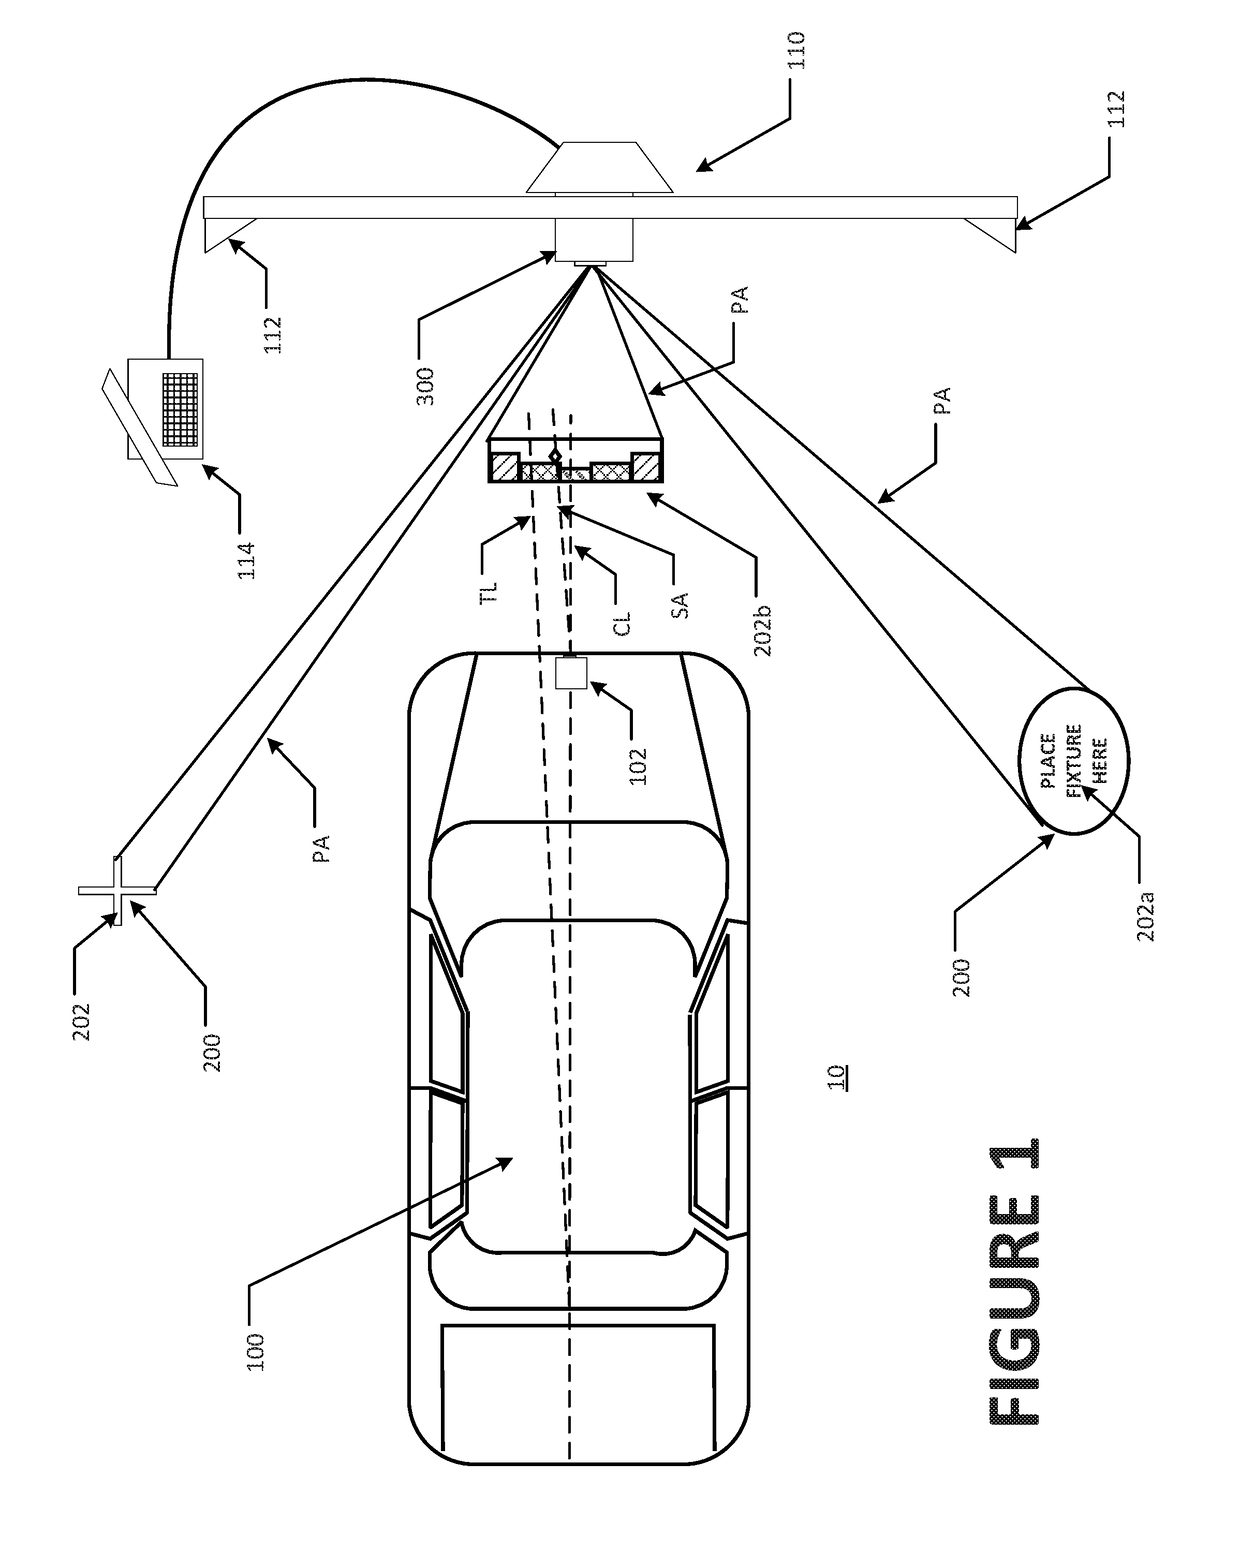 Method and Apparatus For Vehicle Inspection and Safety System Calibration Using Projected Images